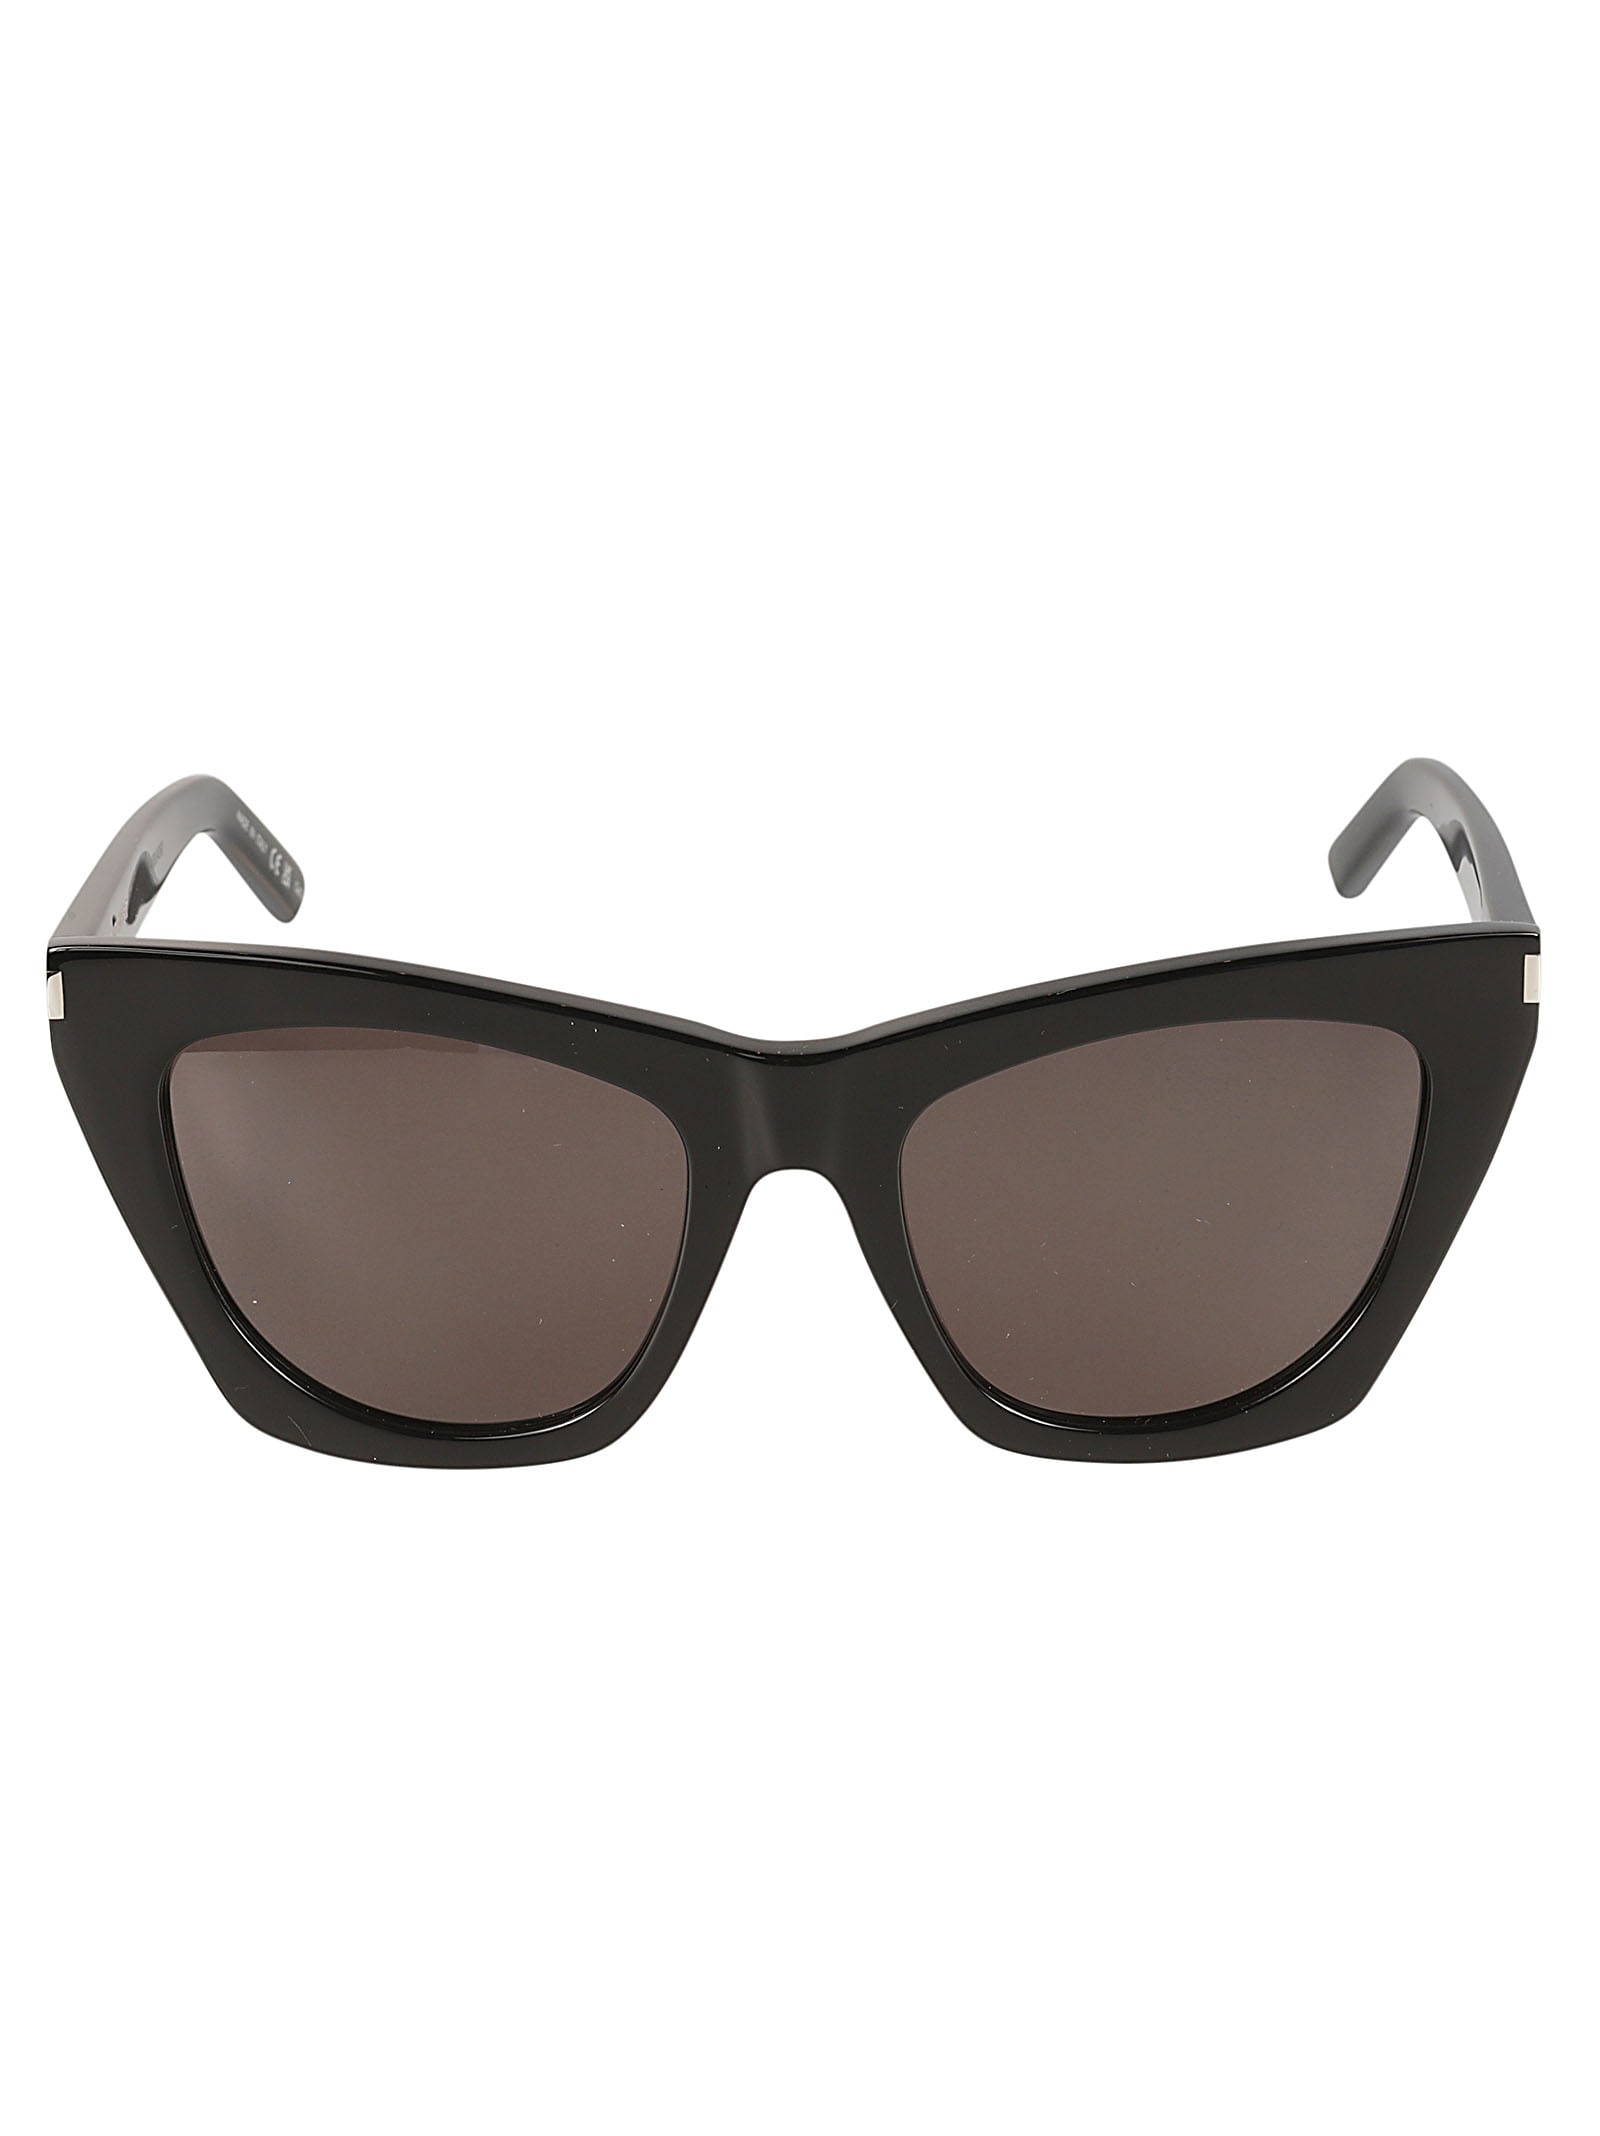 Saint Laurent Butterfly Frame Classic Sunglasses In Black/grey